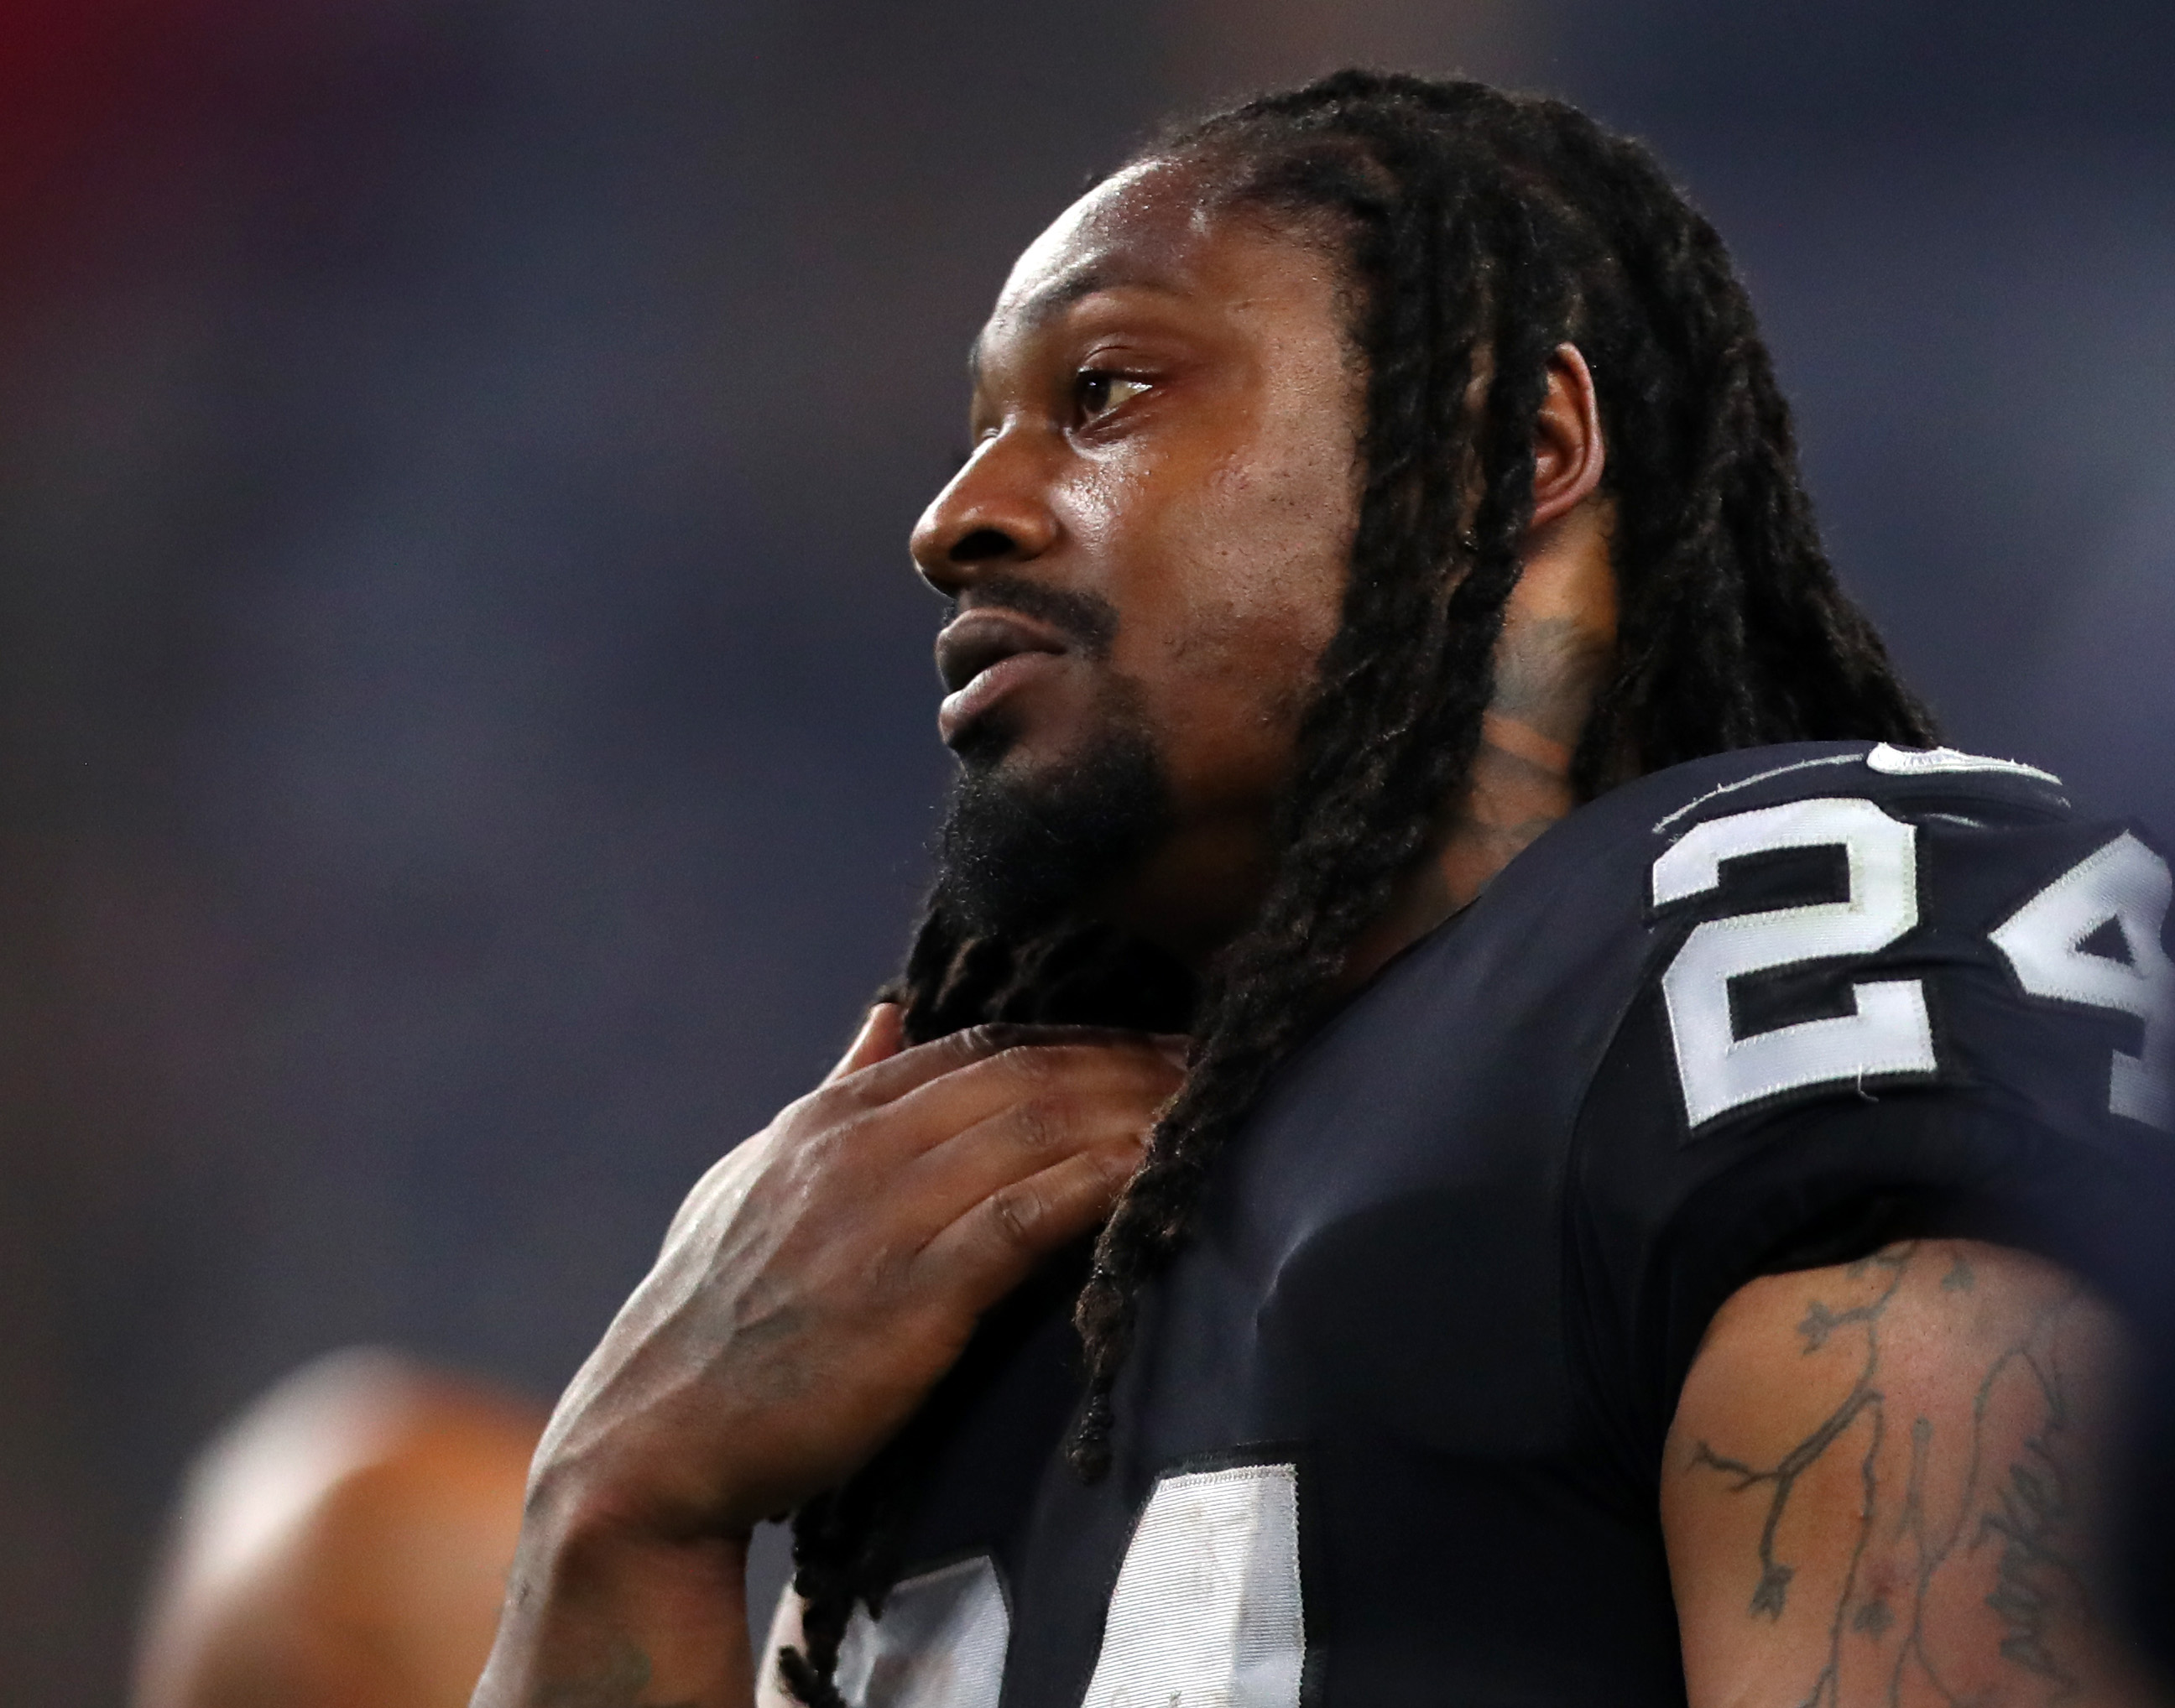 ARLINGTON, TX - AUGUST 26: Marshawn Lynch #24 of the Oakland Raiders on the sidelines in a preseason game against the Dallas Cowboys at AT&T Stadium on August 26, 2017 in Arlington, Texas. (Photo by Tom Pennington/Getty Images)